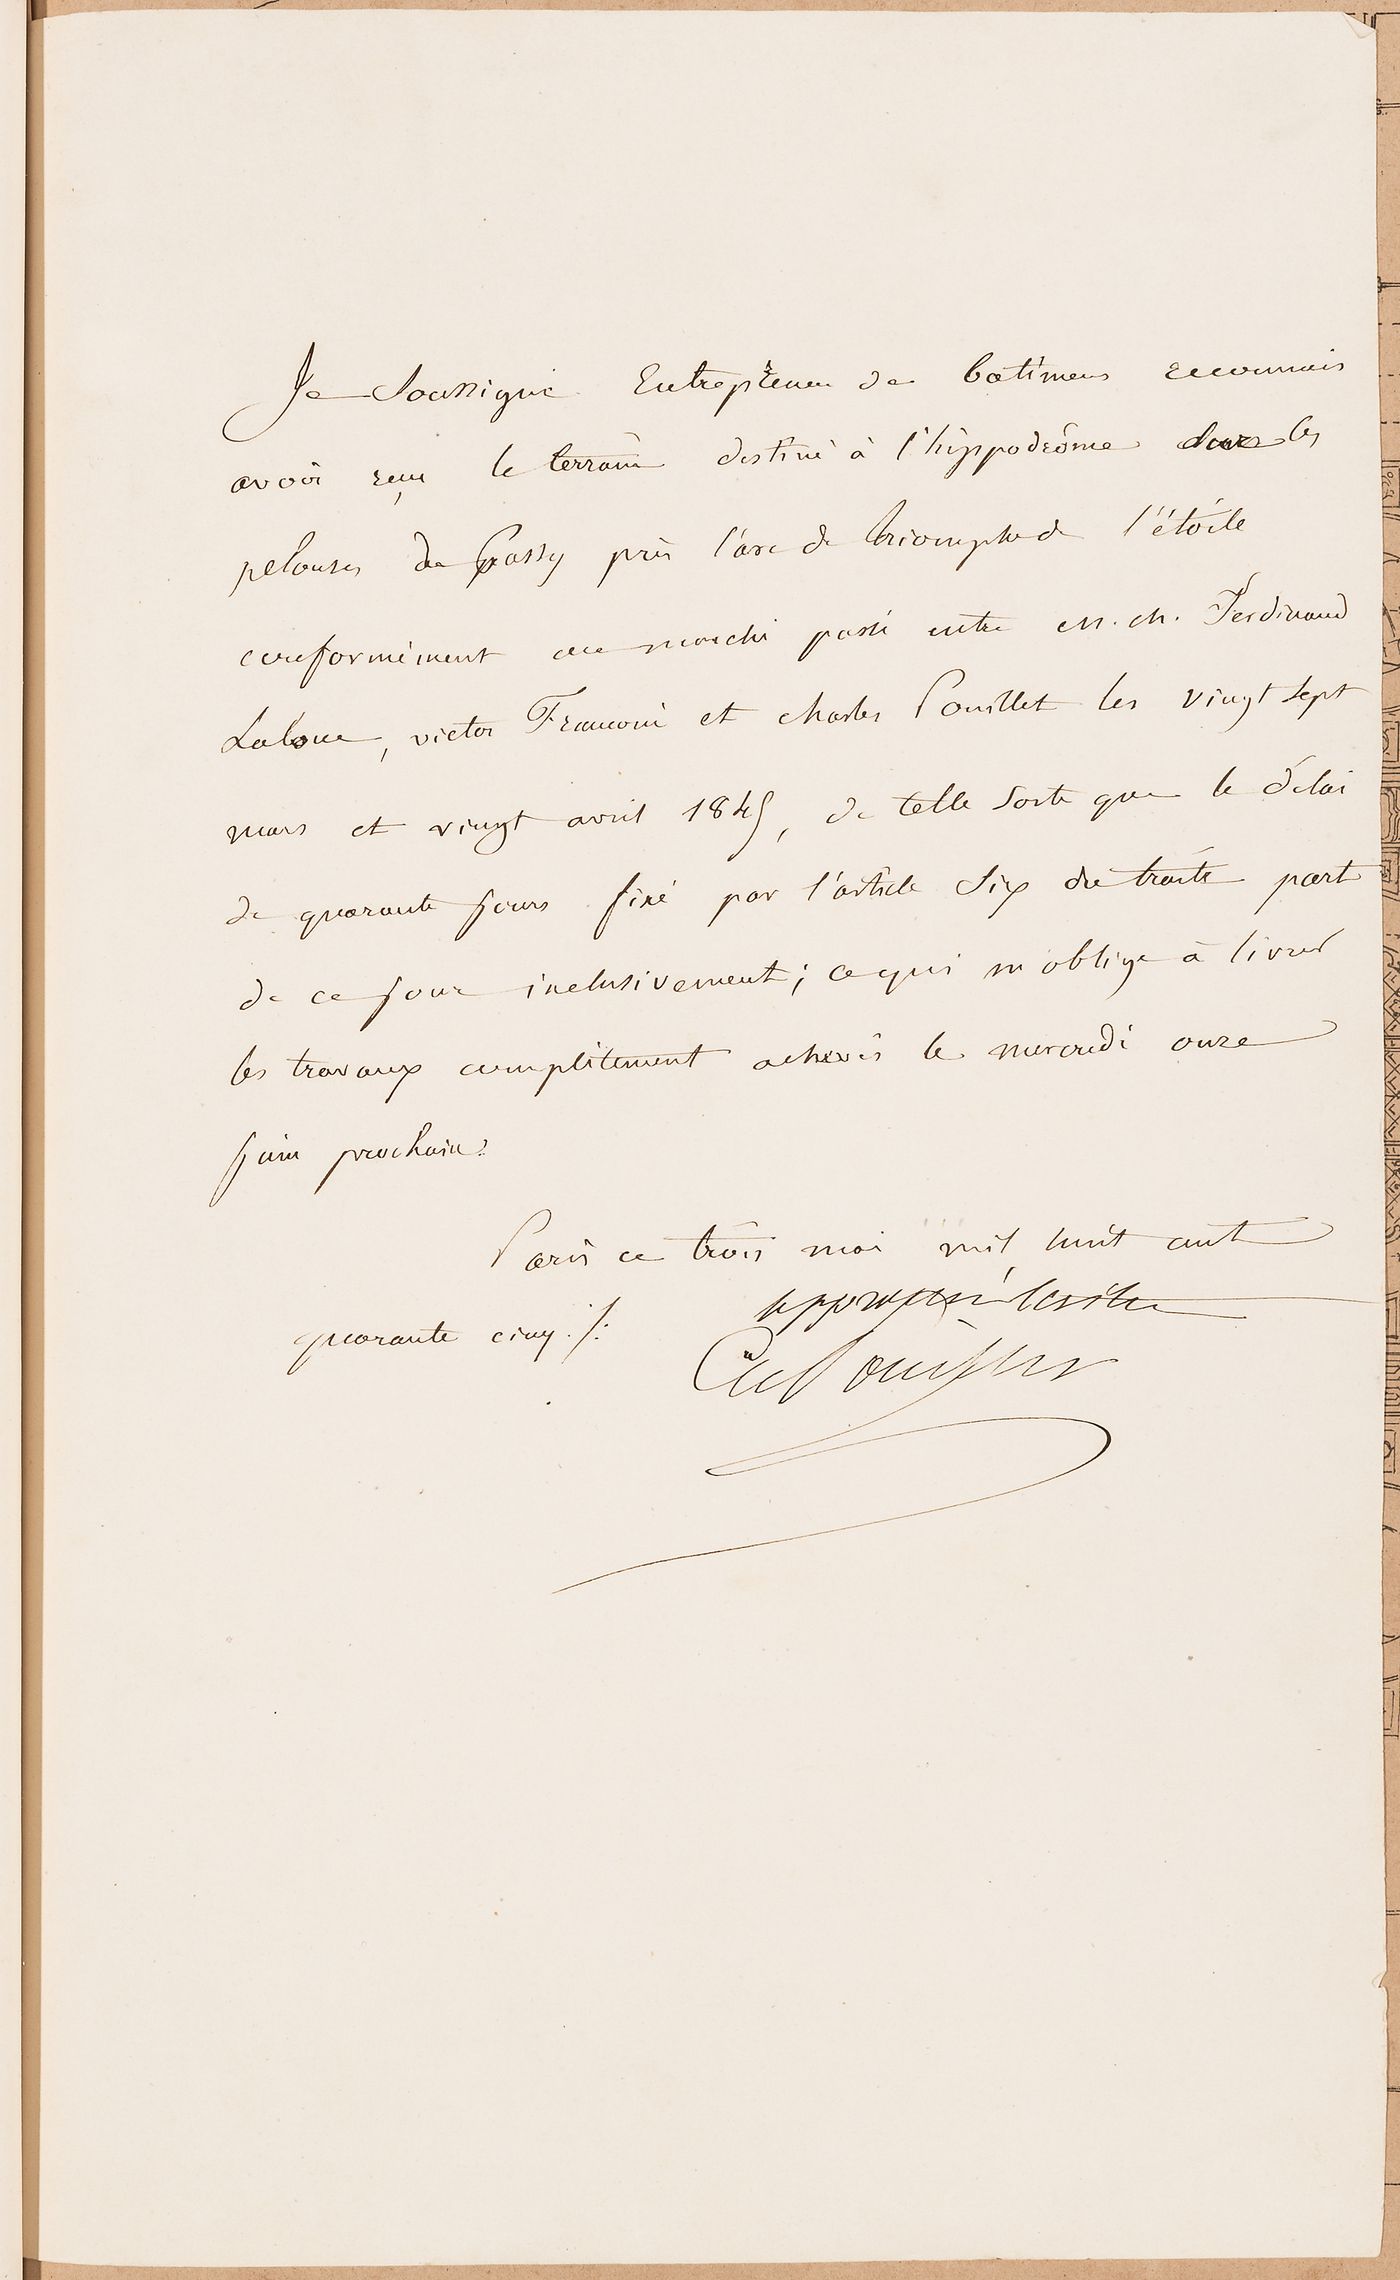 Letter from Charles Pouillet to Charles Rohault de Fleury, March [?] 1845